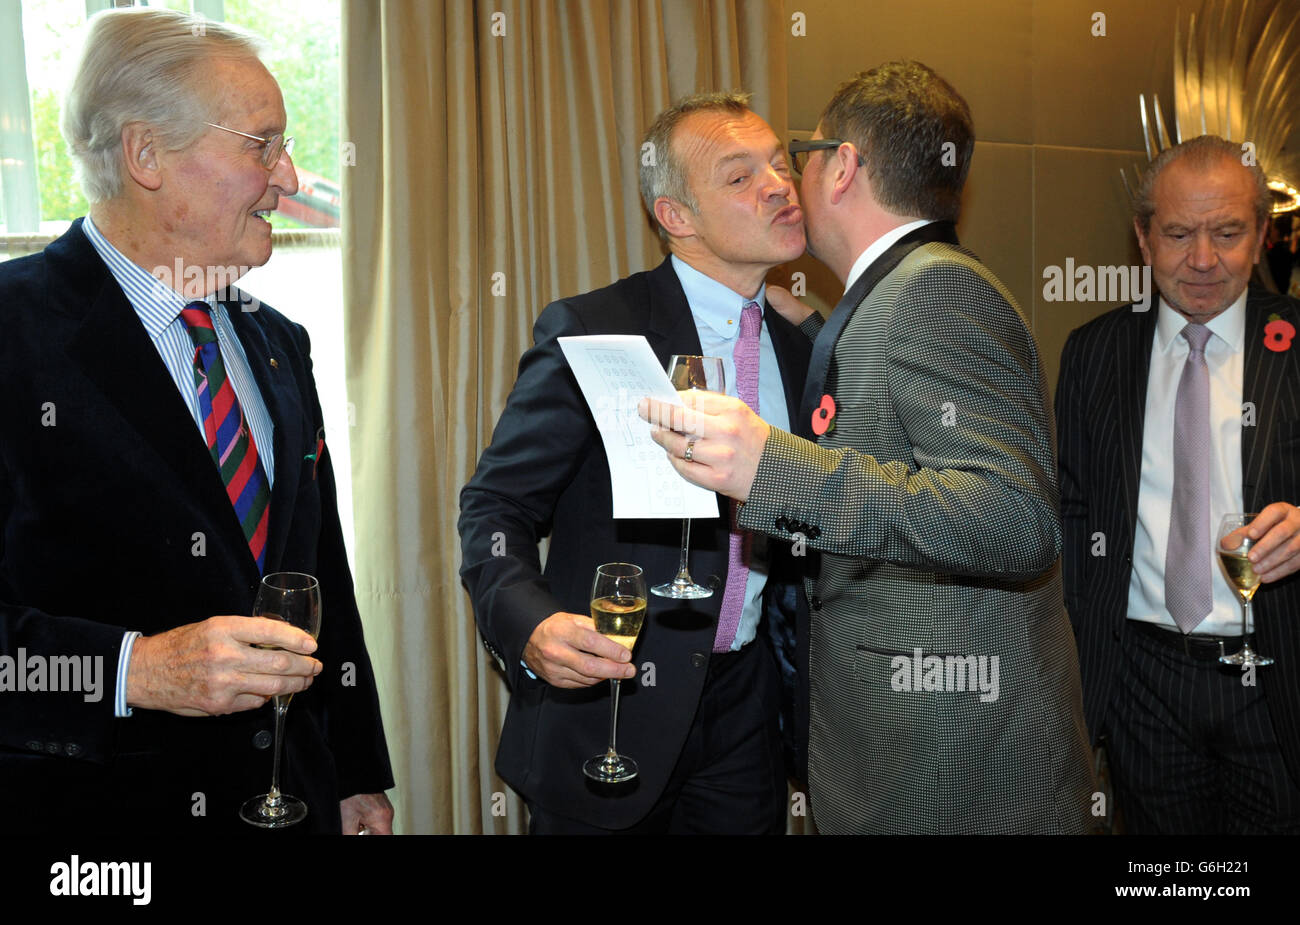 Guest of honour Graham Norton greets Alan Carr as Nicholas Parsons (left) and Lord Alan Sugar (right) look on during a tribute lunch hosted by The Lady Taverners at the Dorchester Hotel, London. Stock Photo